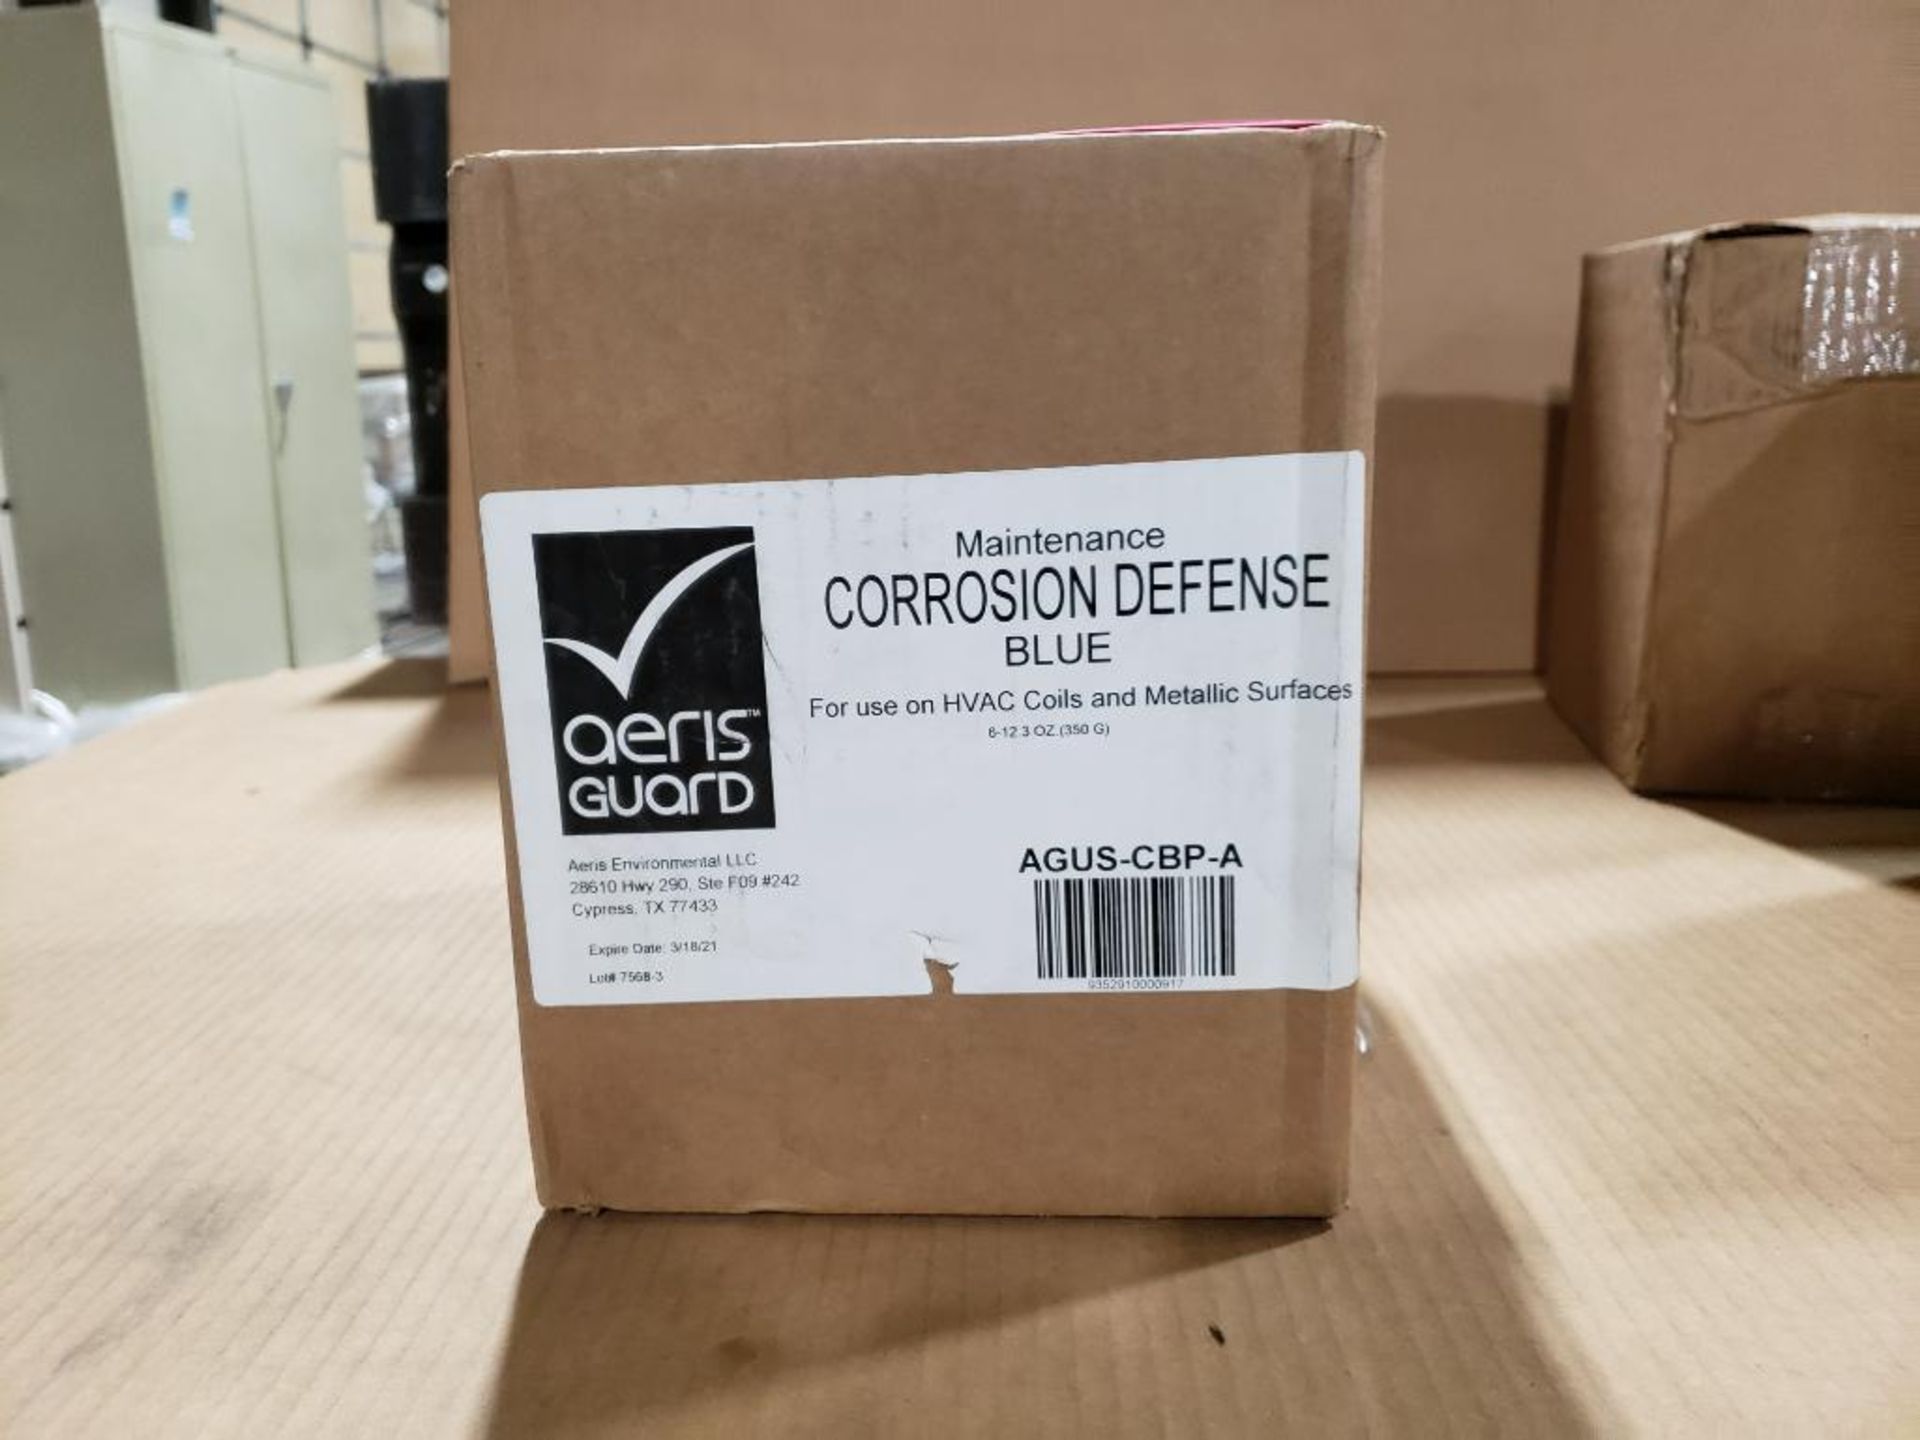 Qty 12 - Aeris Guard corrosion defense blue. Part number AGUS-CBP-A. 3 boxes of 6. - Image 2 of 4